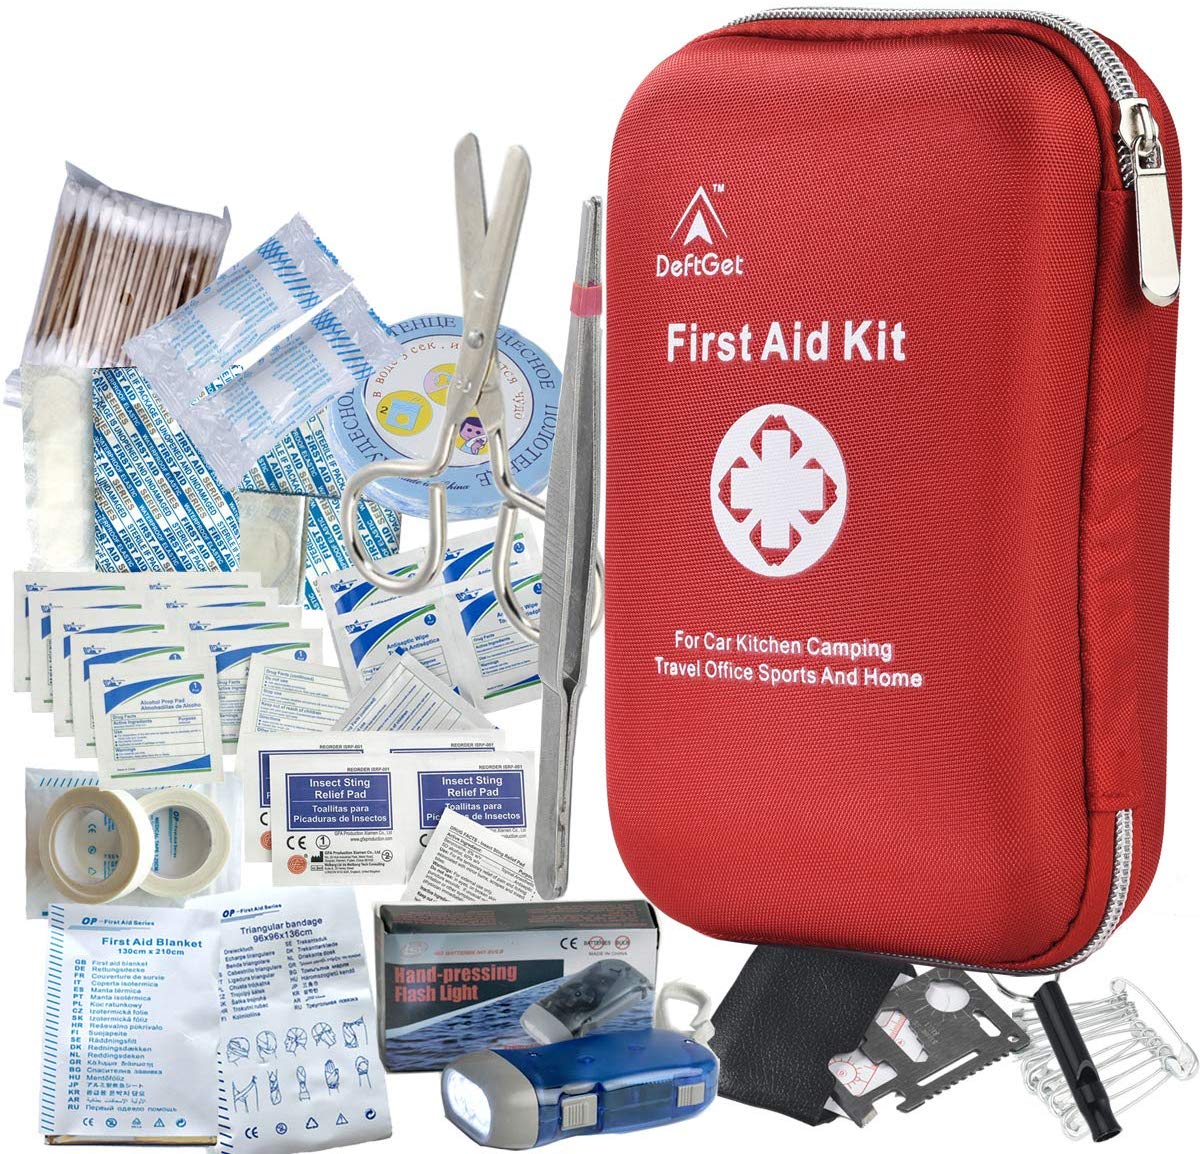 DeftGet Multipurpose First Aid Kit, 163-Piece